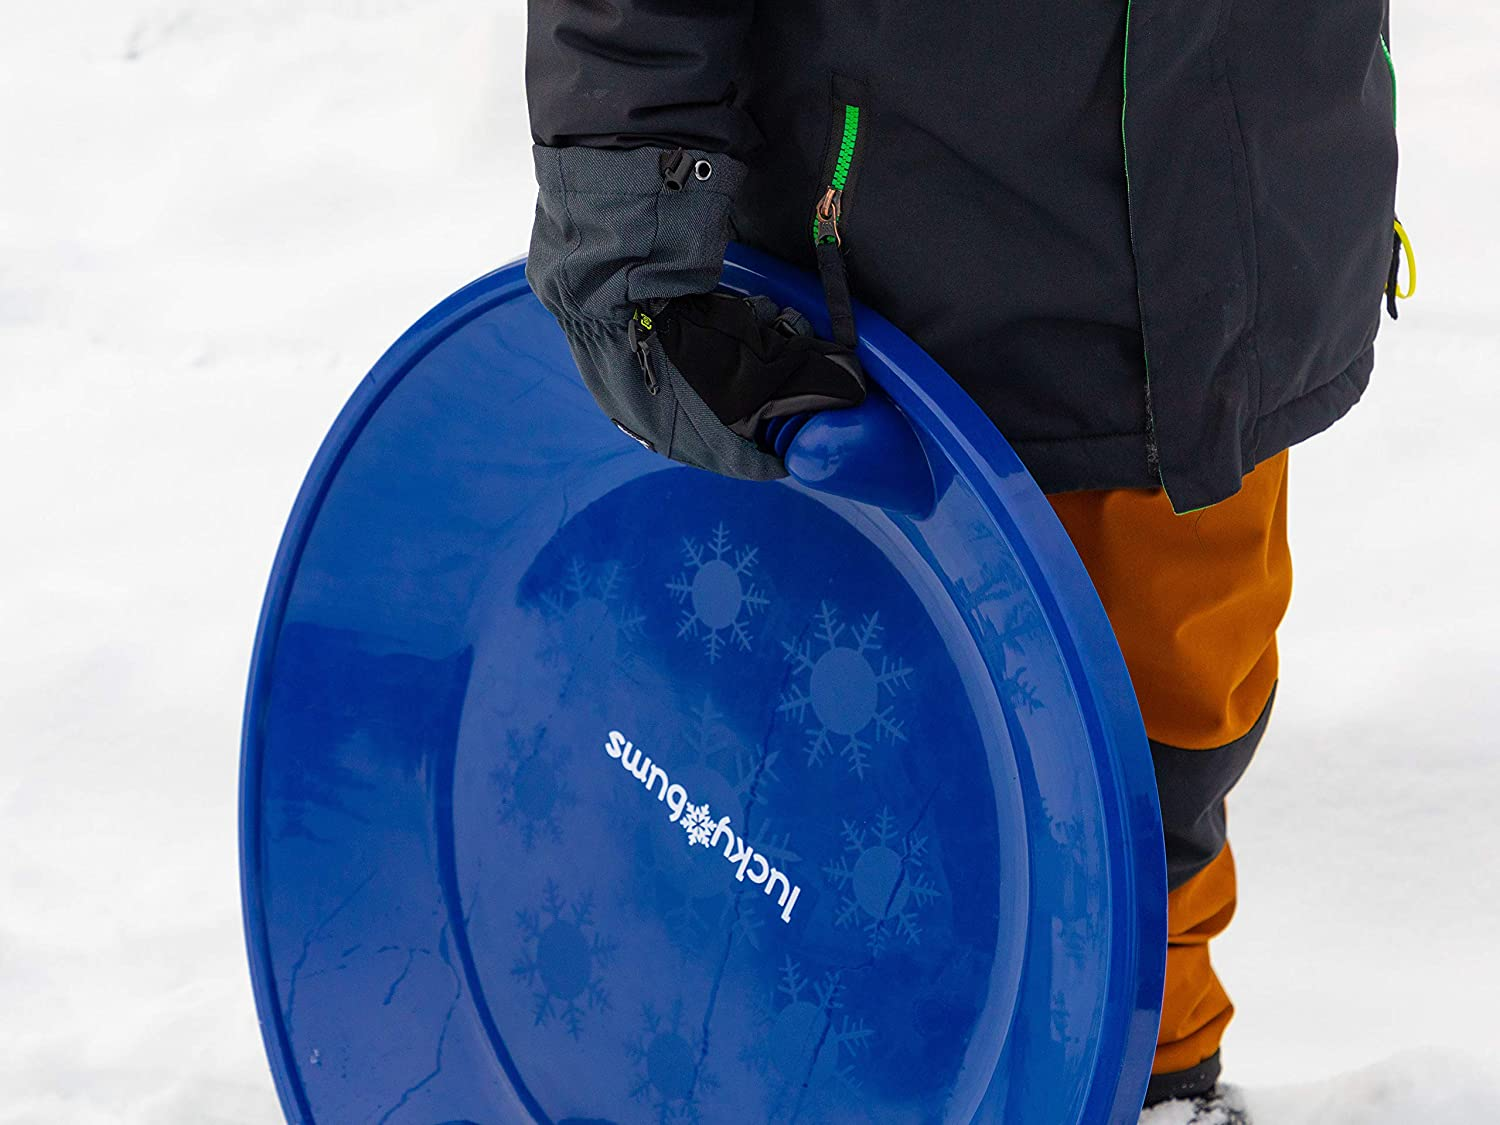 The best snow sleds